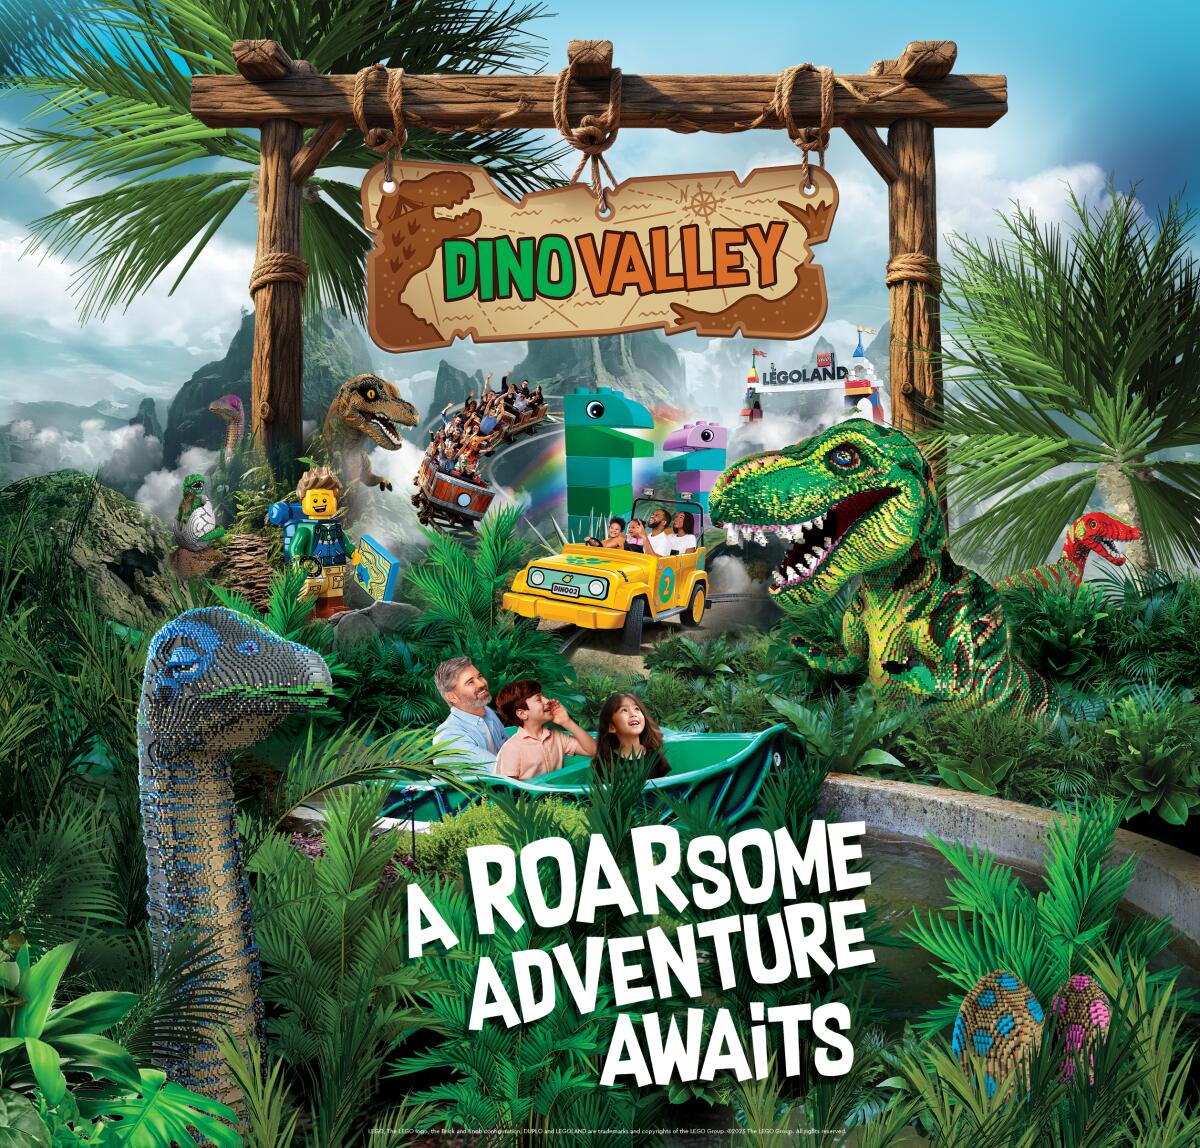 Legoland's new Dino Valley, planned for 2024, will include two new rides.